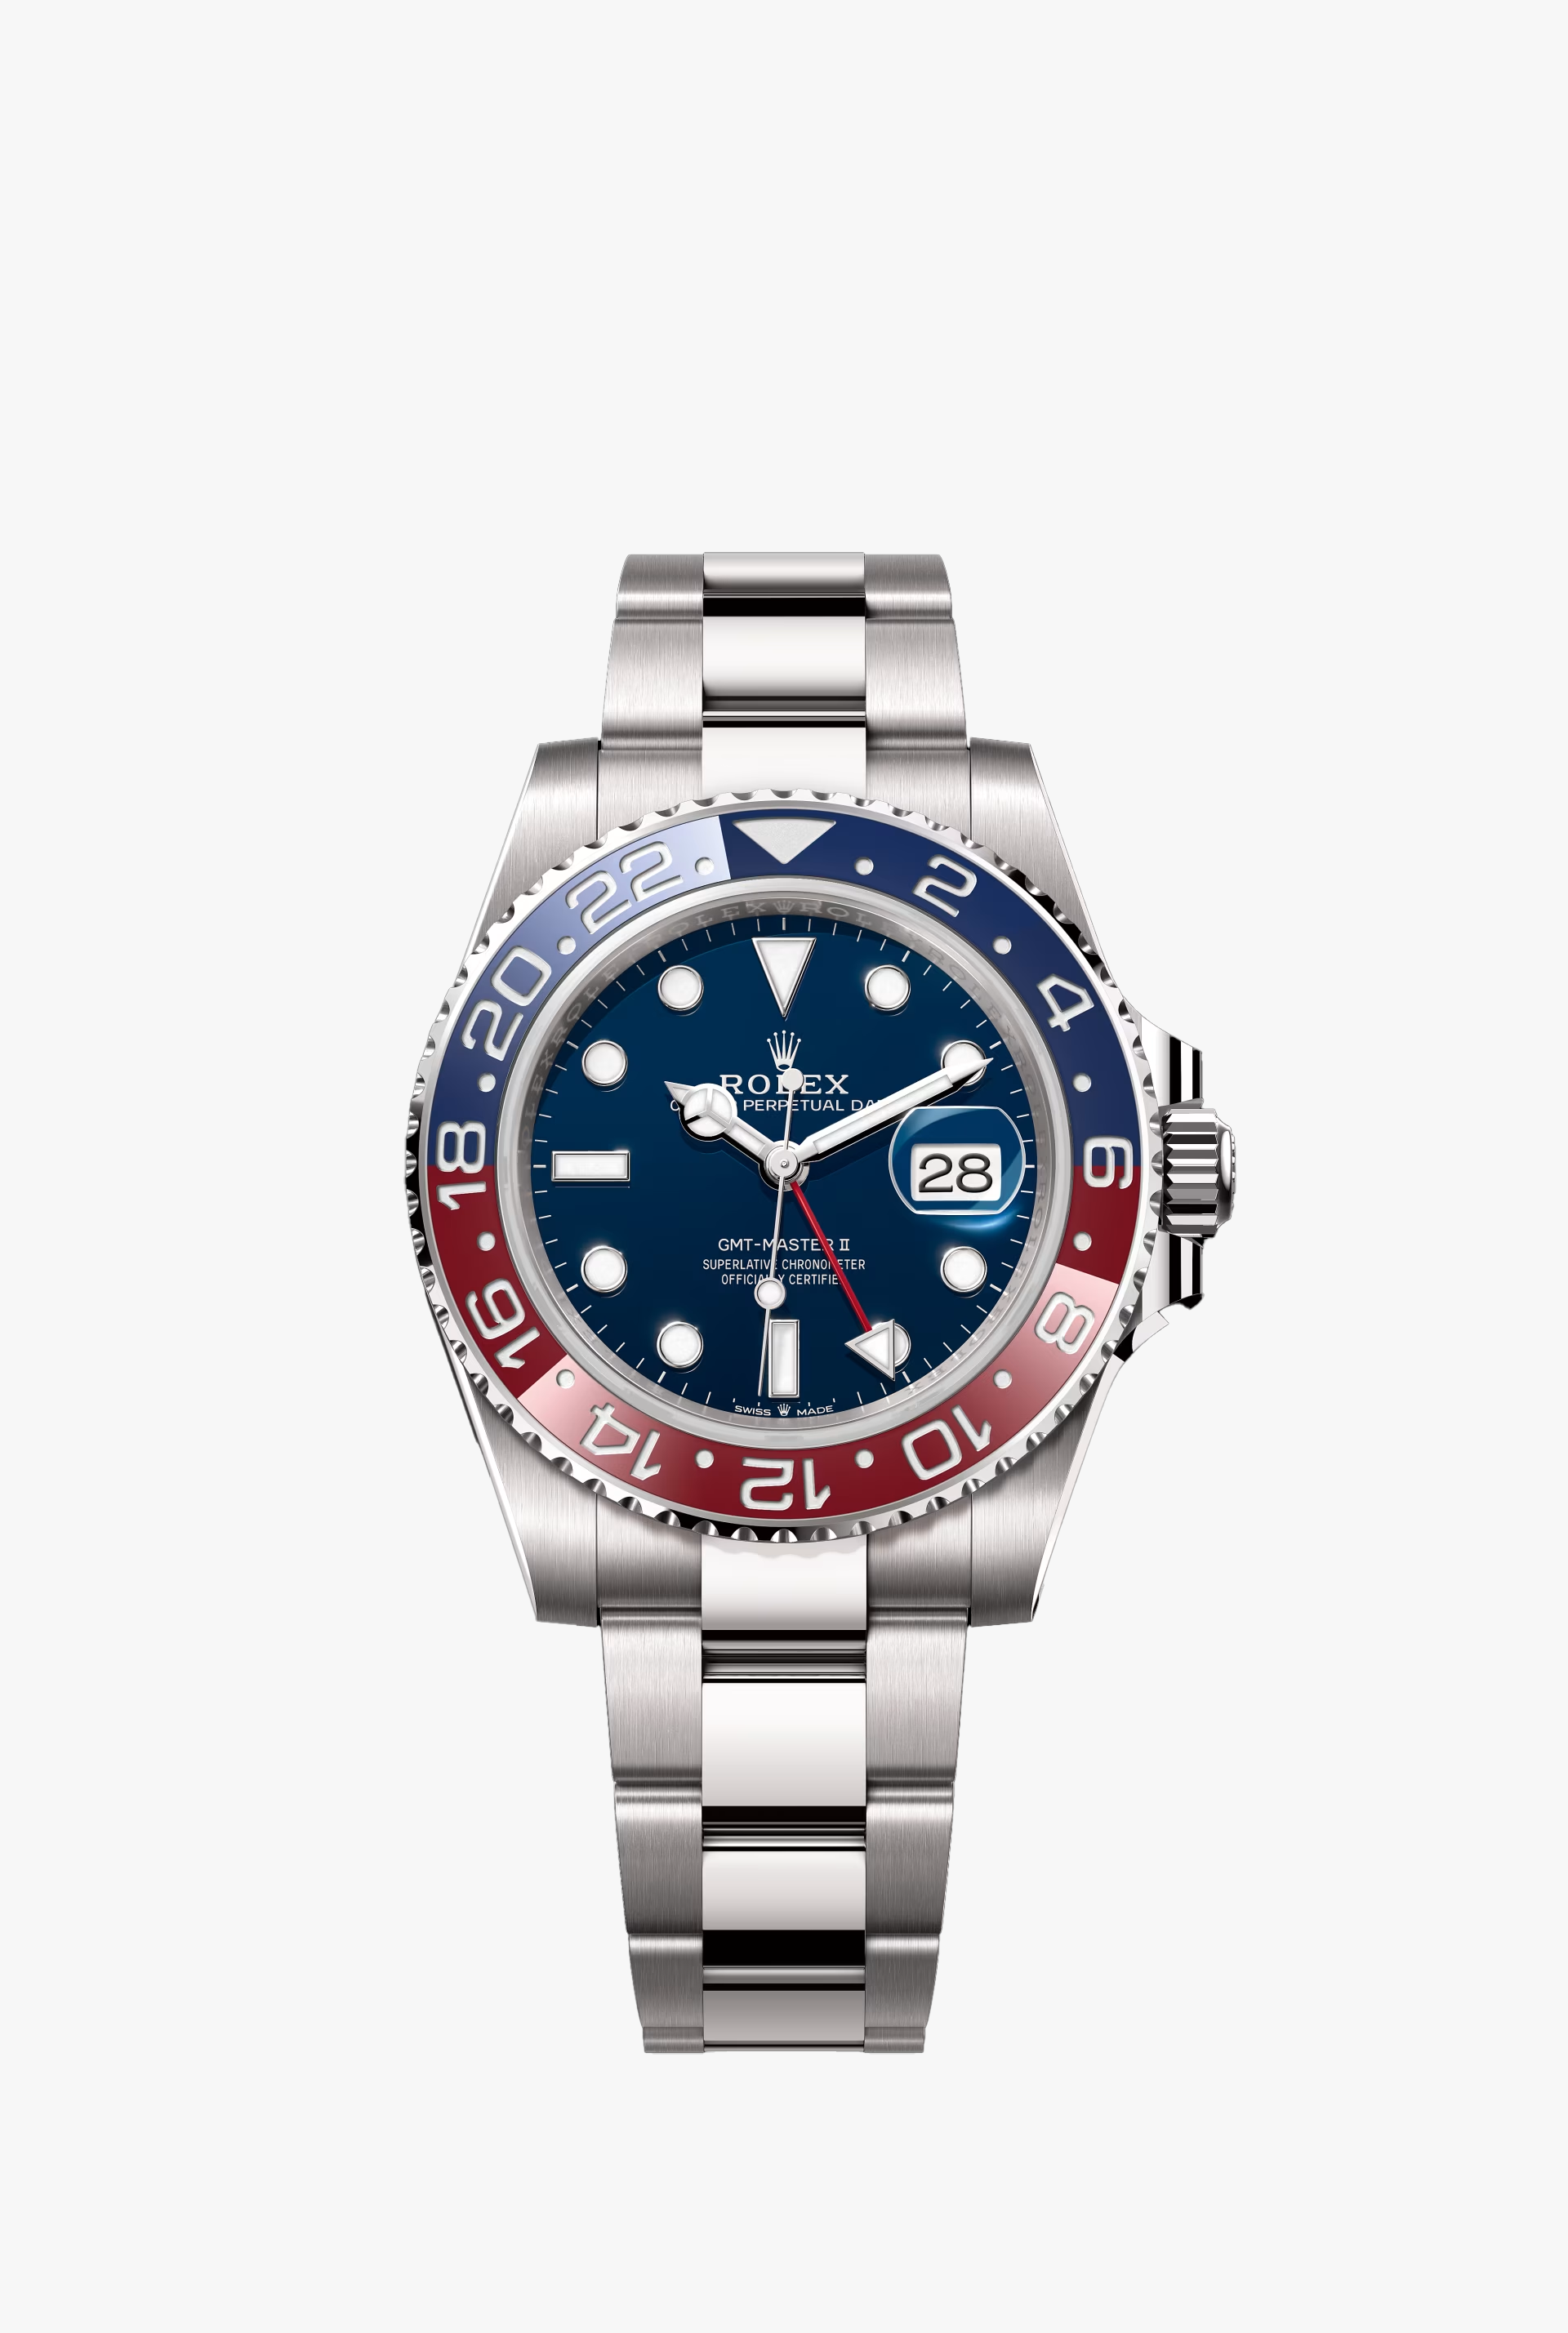 Rolex GMT-Masterl Oyster,40 mm,white gold Reference126719BLRO